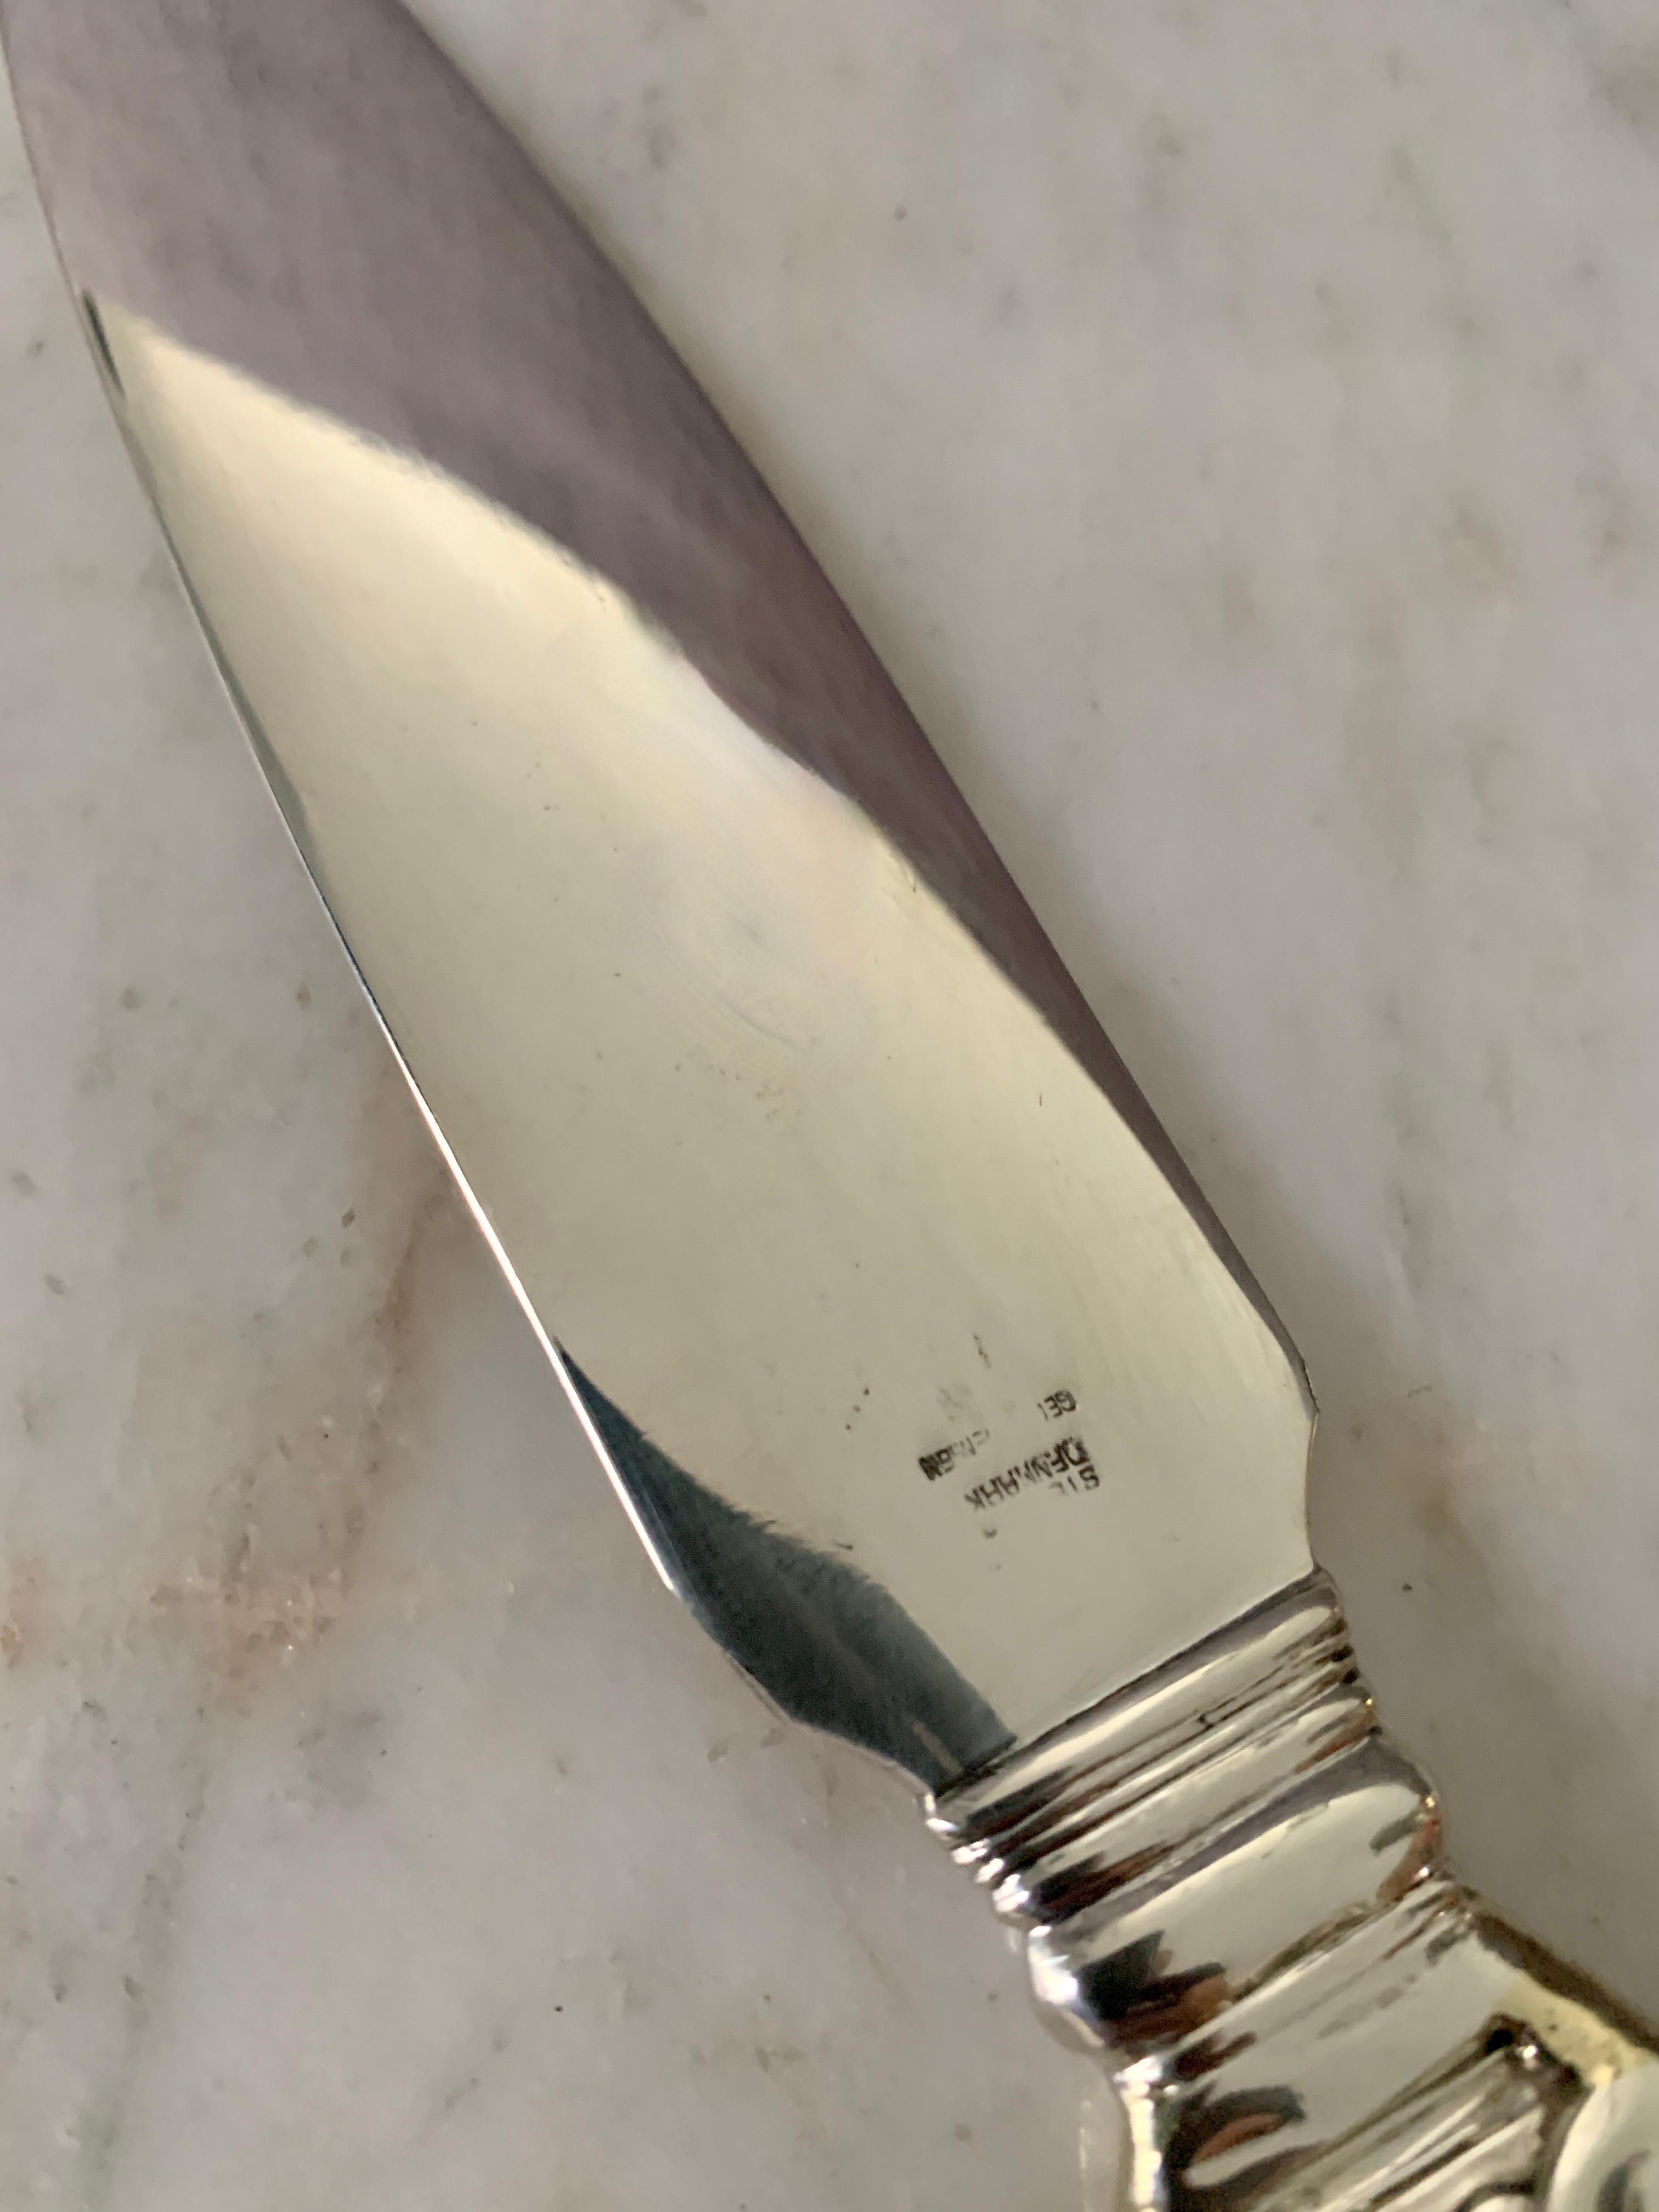 A stunning and quite large Georg Jensen Denmark Letter opener. 

The piece has a lovely handle. While there has been some repair the piece is in sturdy an newly polished condition. The opener is very large at 10 inches long - a wonderful practical